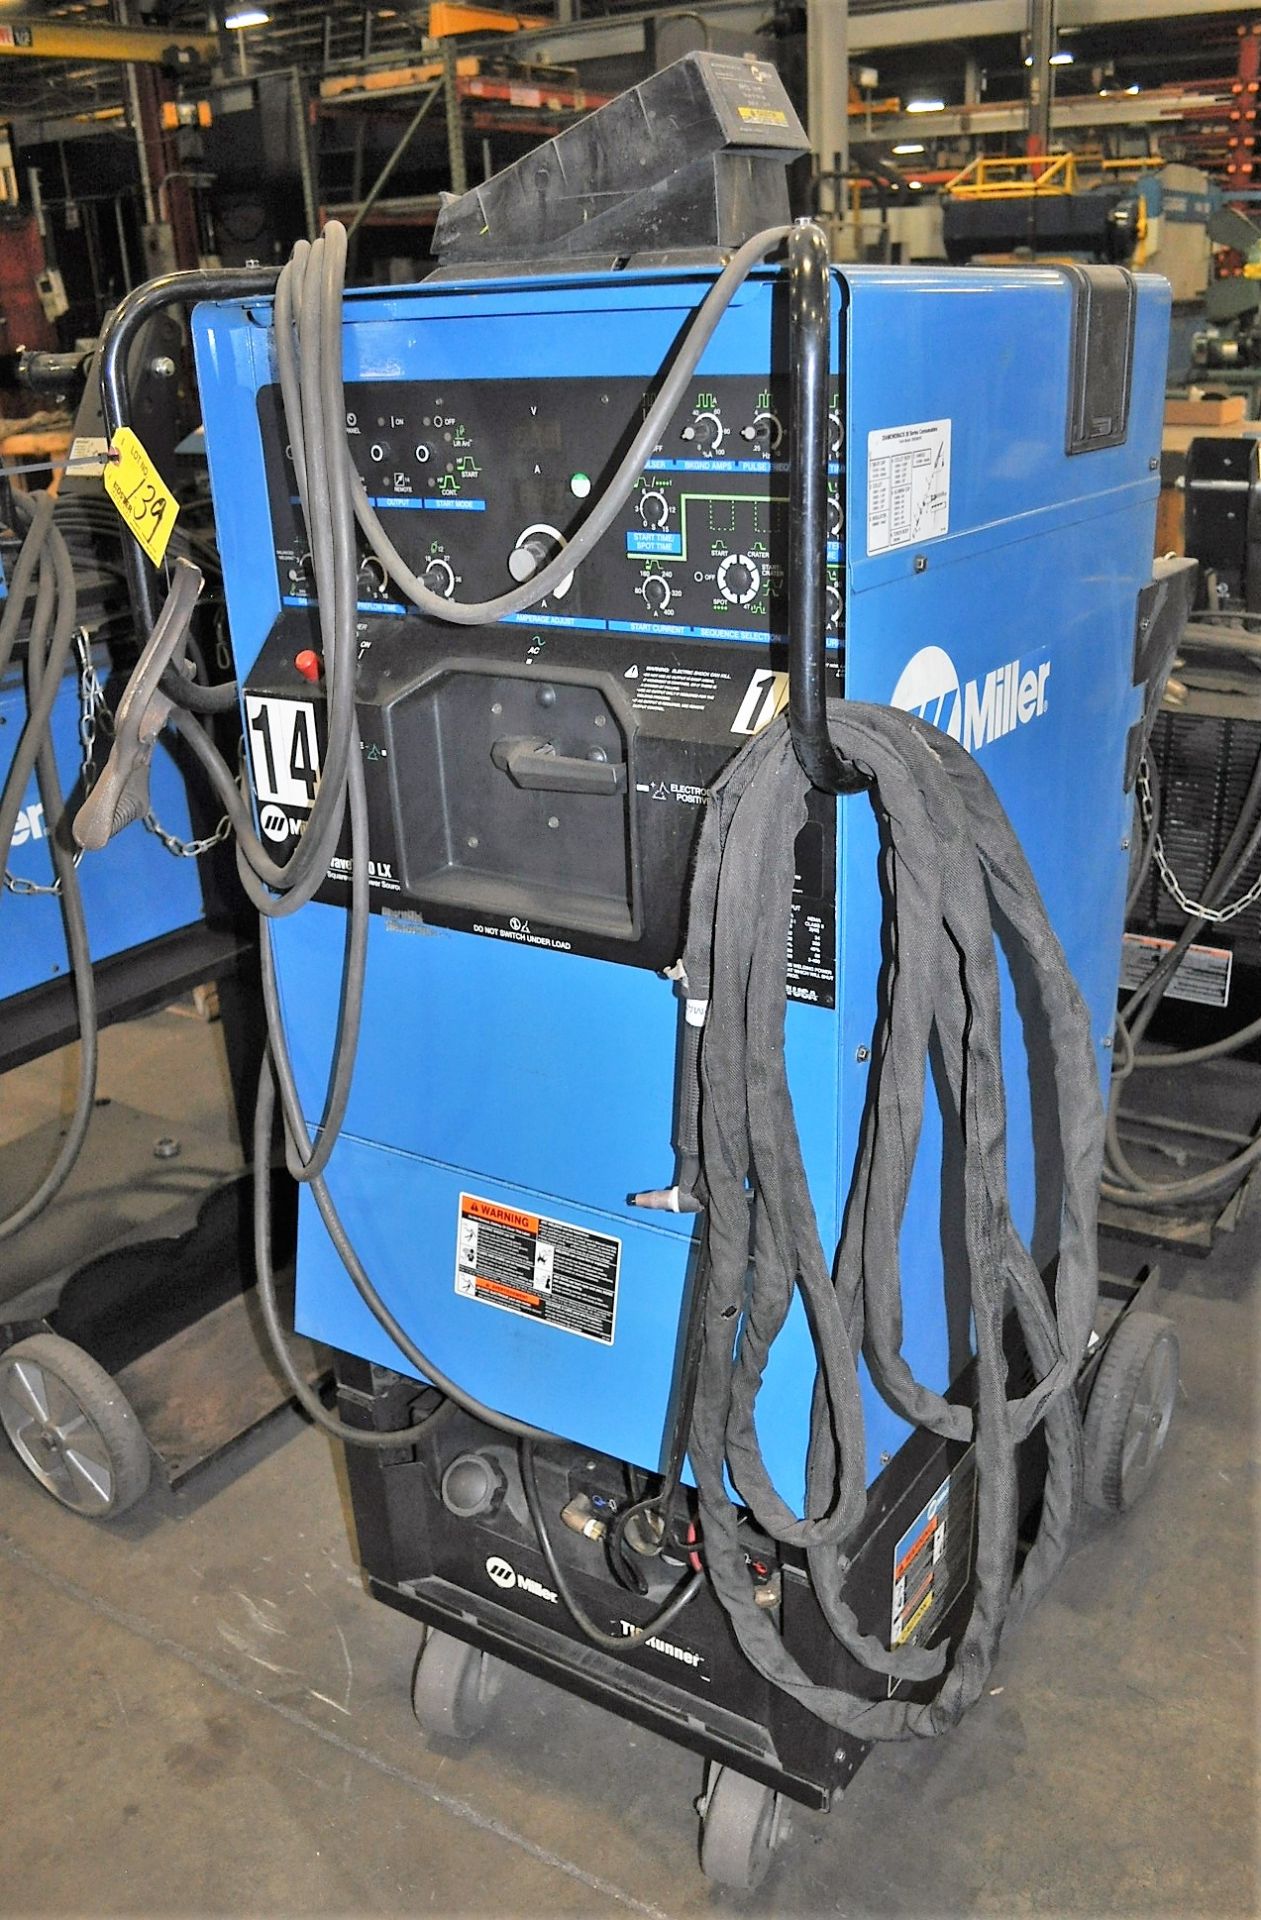 MILLER SYNCROWAVE 350LX 300 / 350-AMP CC AC/DC WELDING POWER SOURCE, WITH TIG GUN, TIG RUNNER, - Image 2 of 3